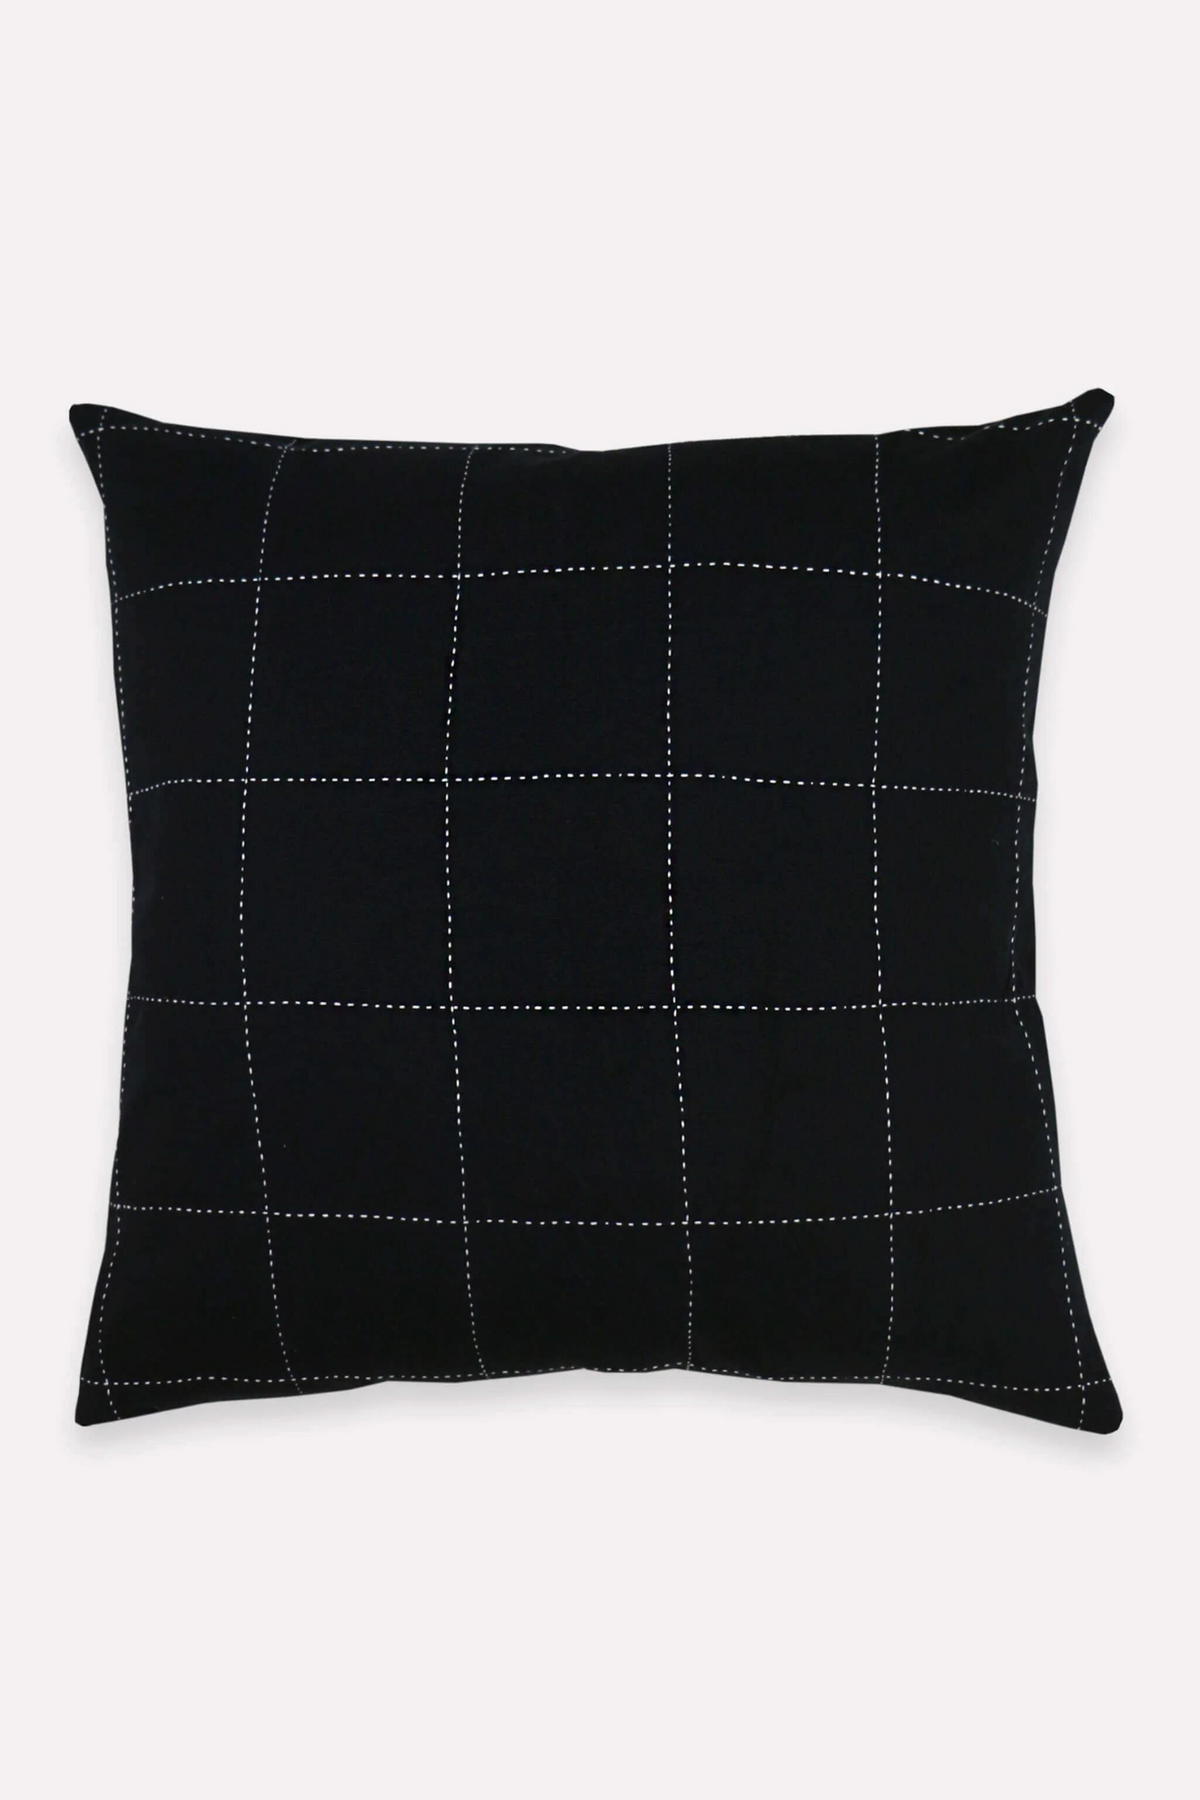 Anchal Project Grid-Stitch Throw Pillow Cover